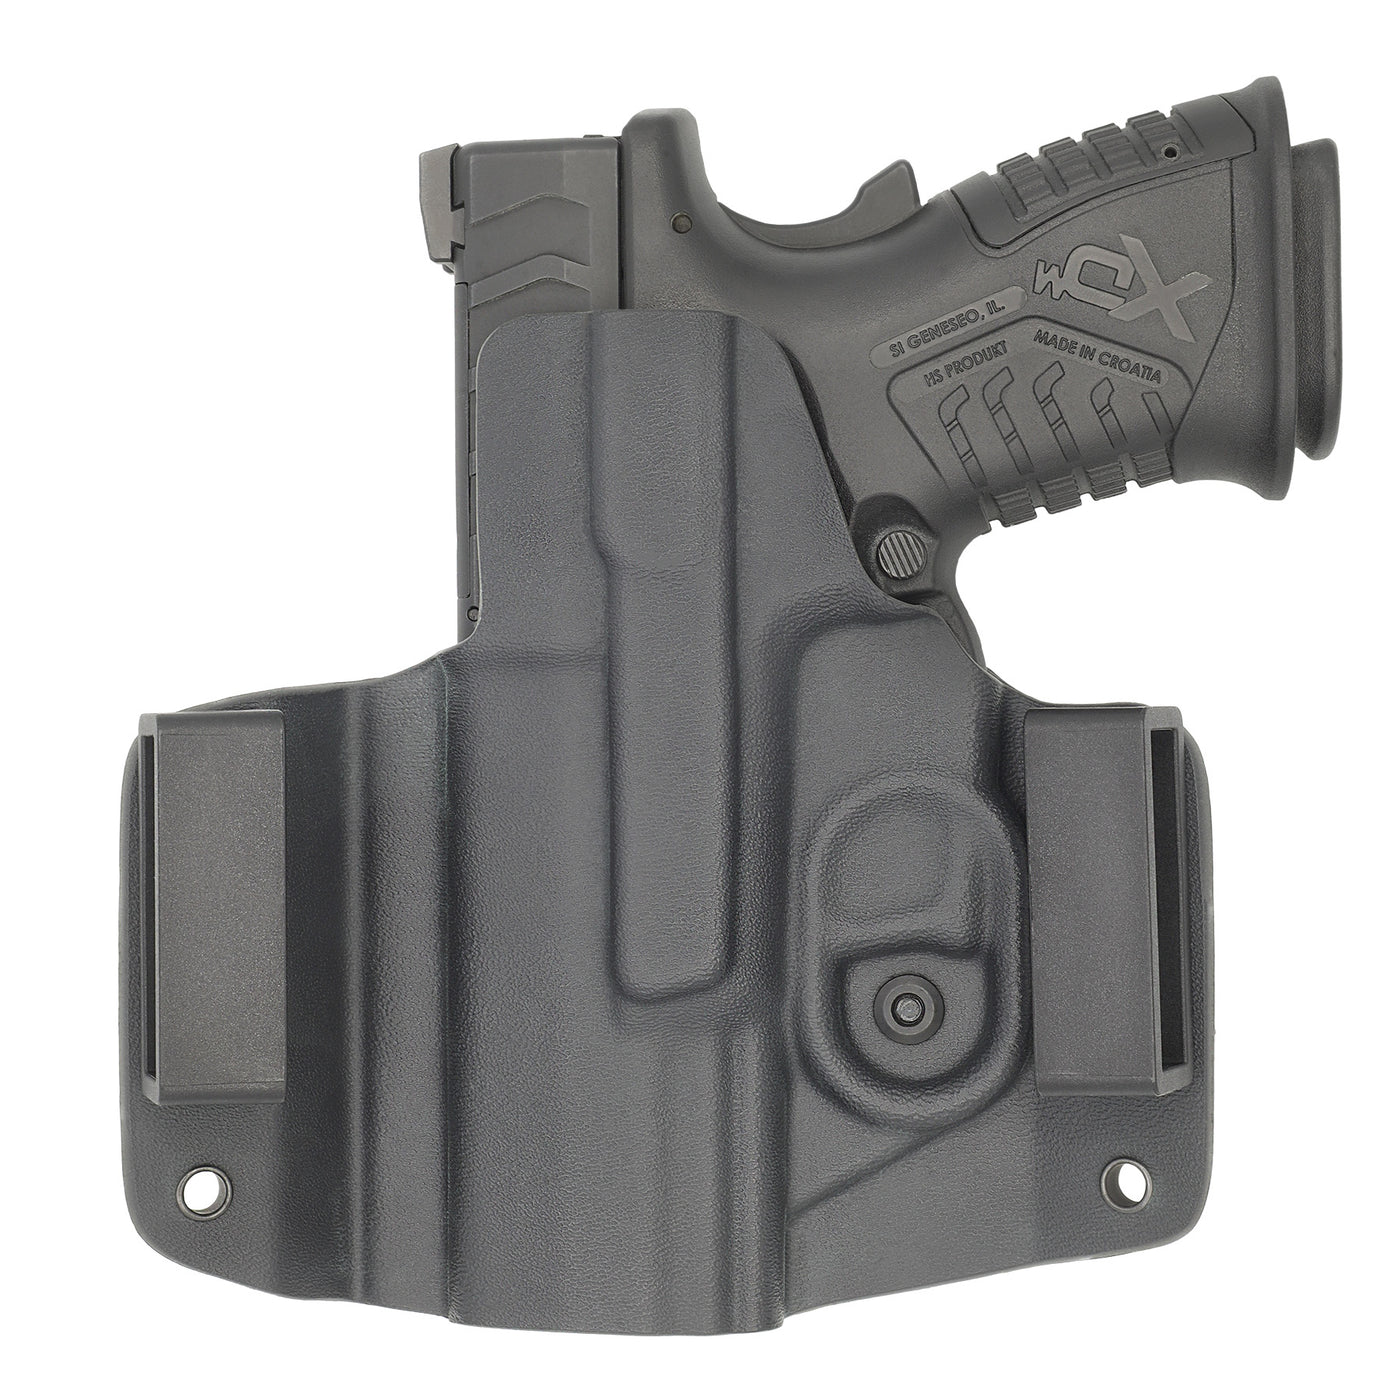 C&G Holsters Quickship OWB covert Springfield XDM Elite 3.8" OSP in holstered position back view